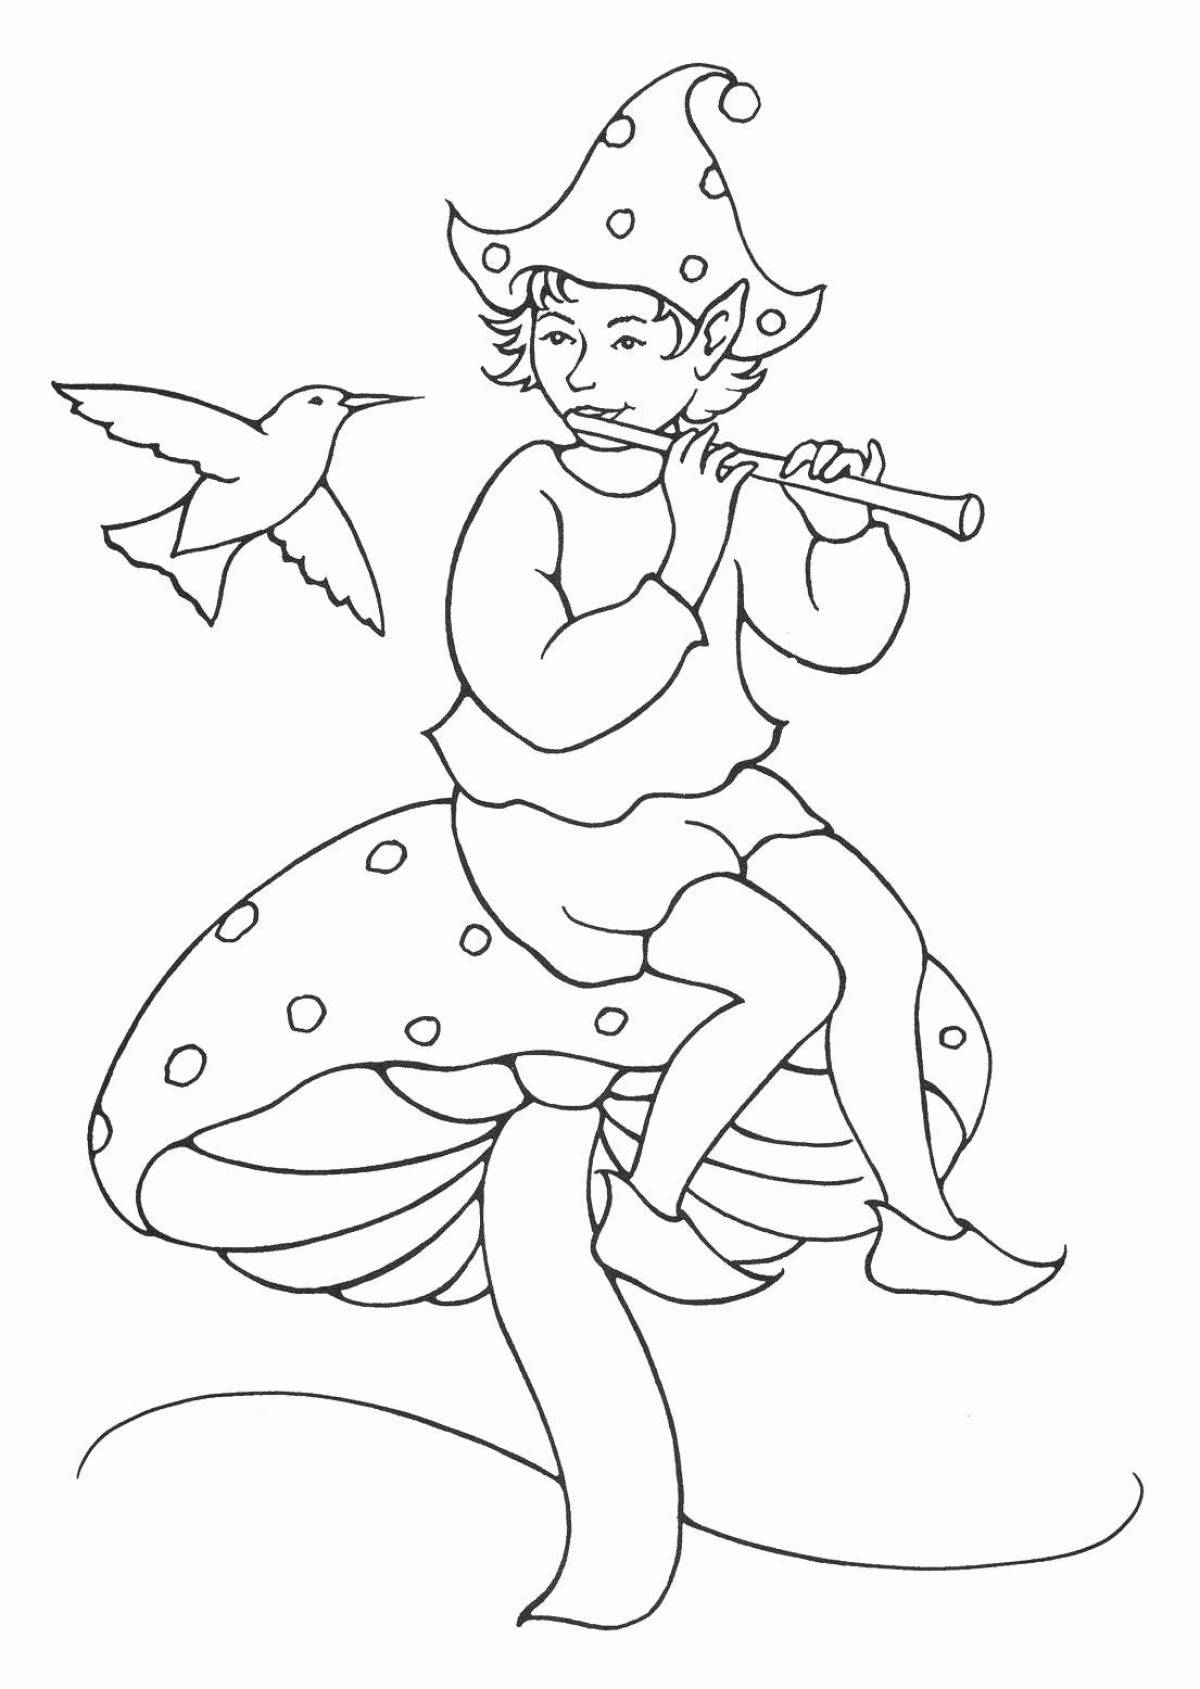 Elves coloring page